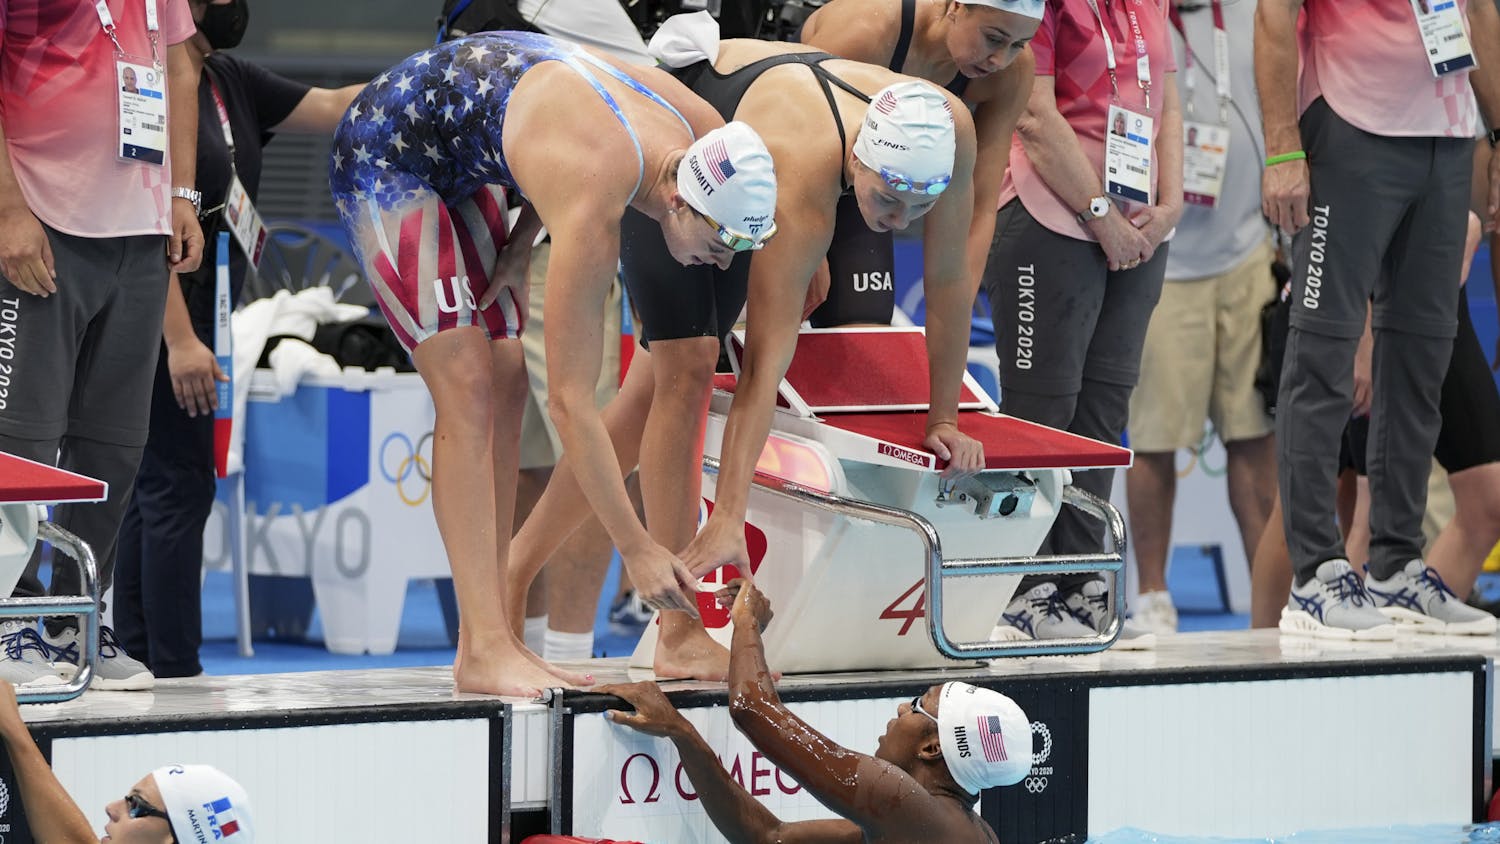 Natalie Hinds, bottom, of the United States is congratulated by teammates after swimming the fourth leg during a preliminary round of the women's 4x100m freestyle relay at the 2020 Summer Olympics, Saturday, July 24, 2021, in Tokyo, Japan. (AP Photo/Matthias Schrader)